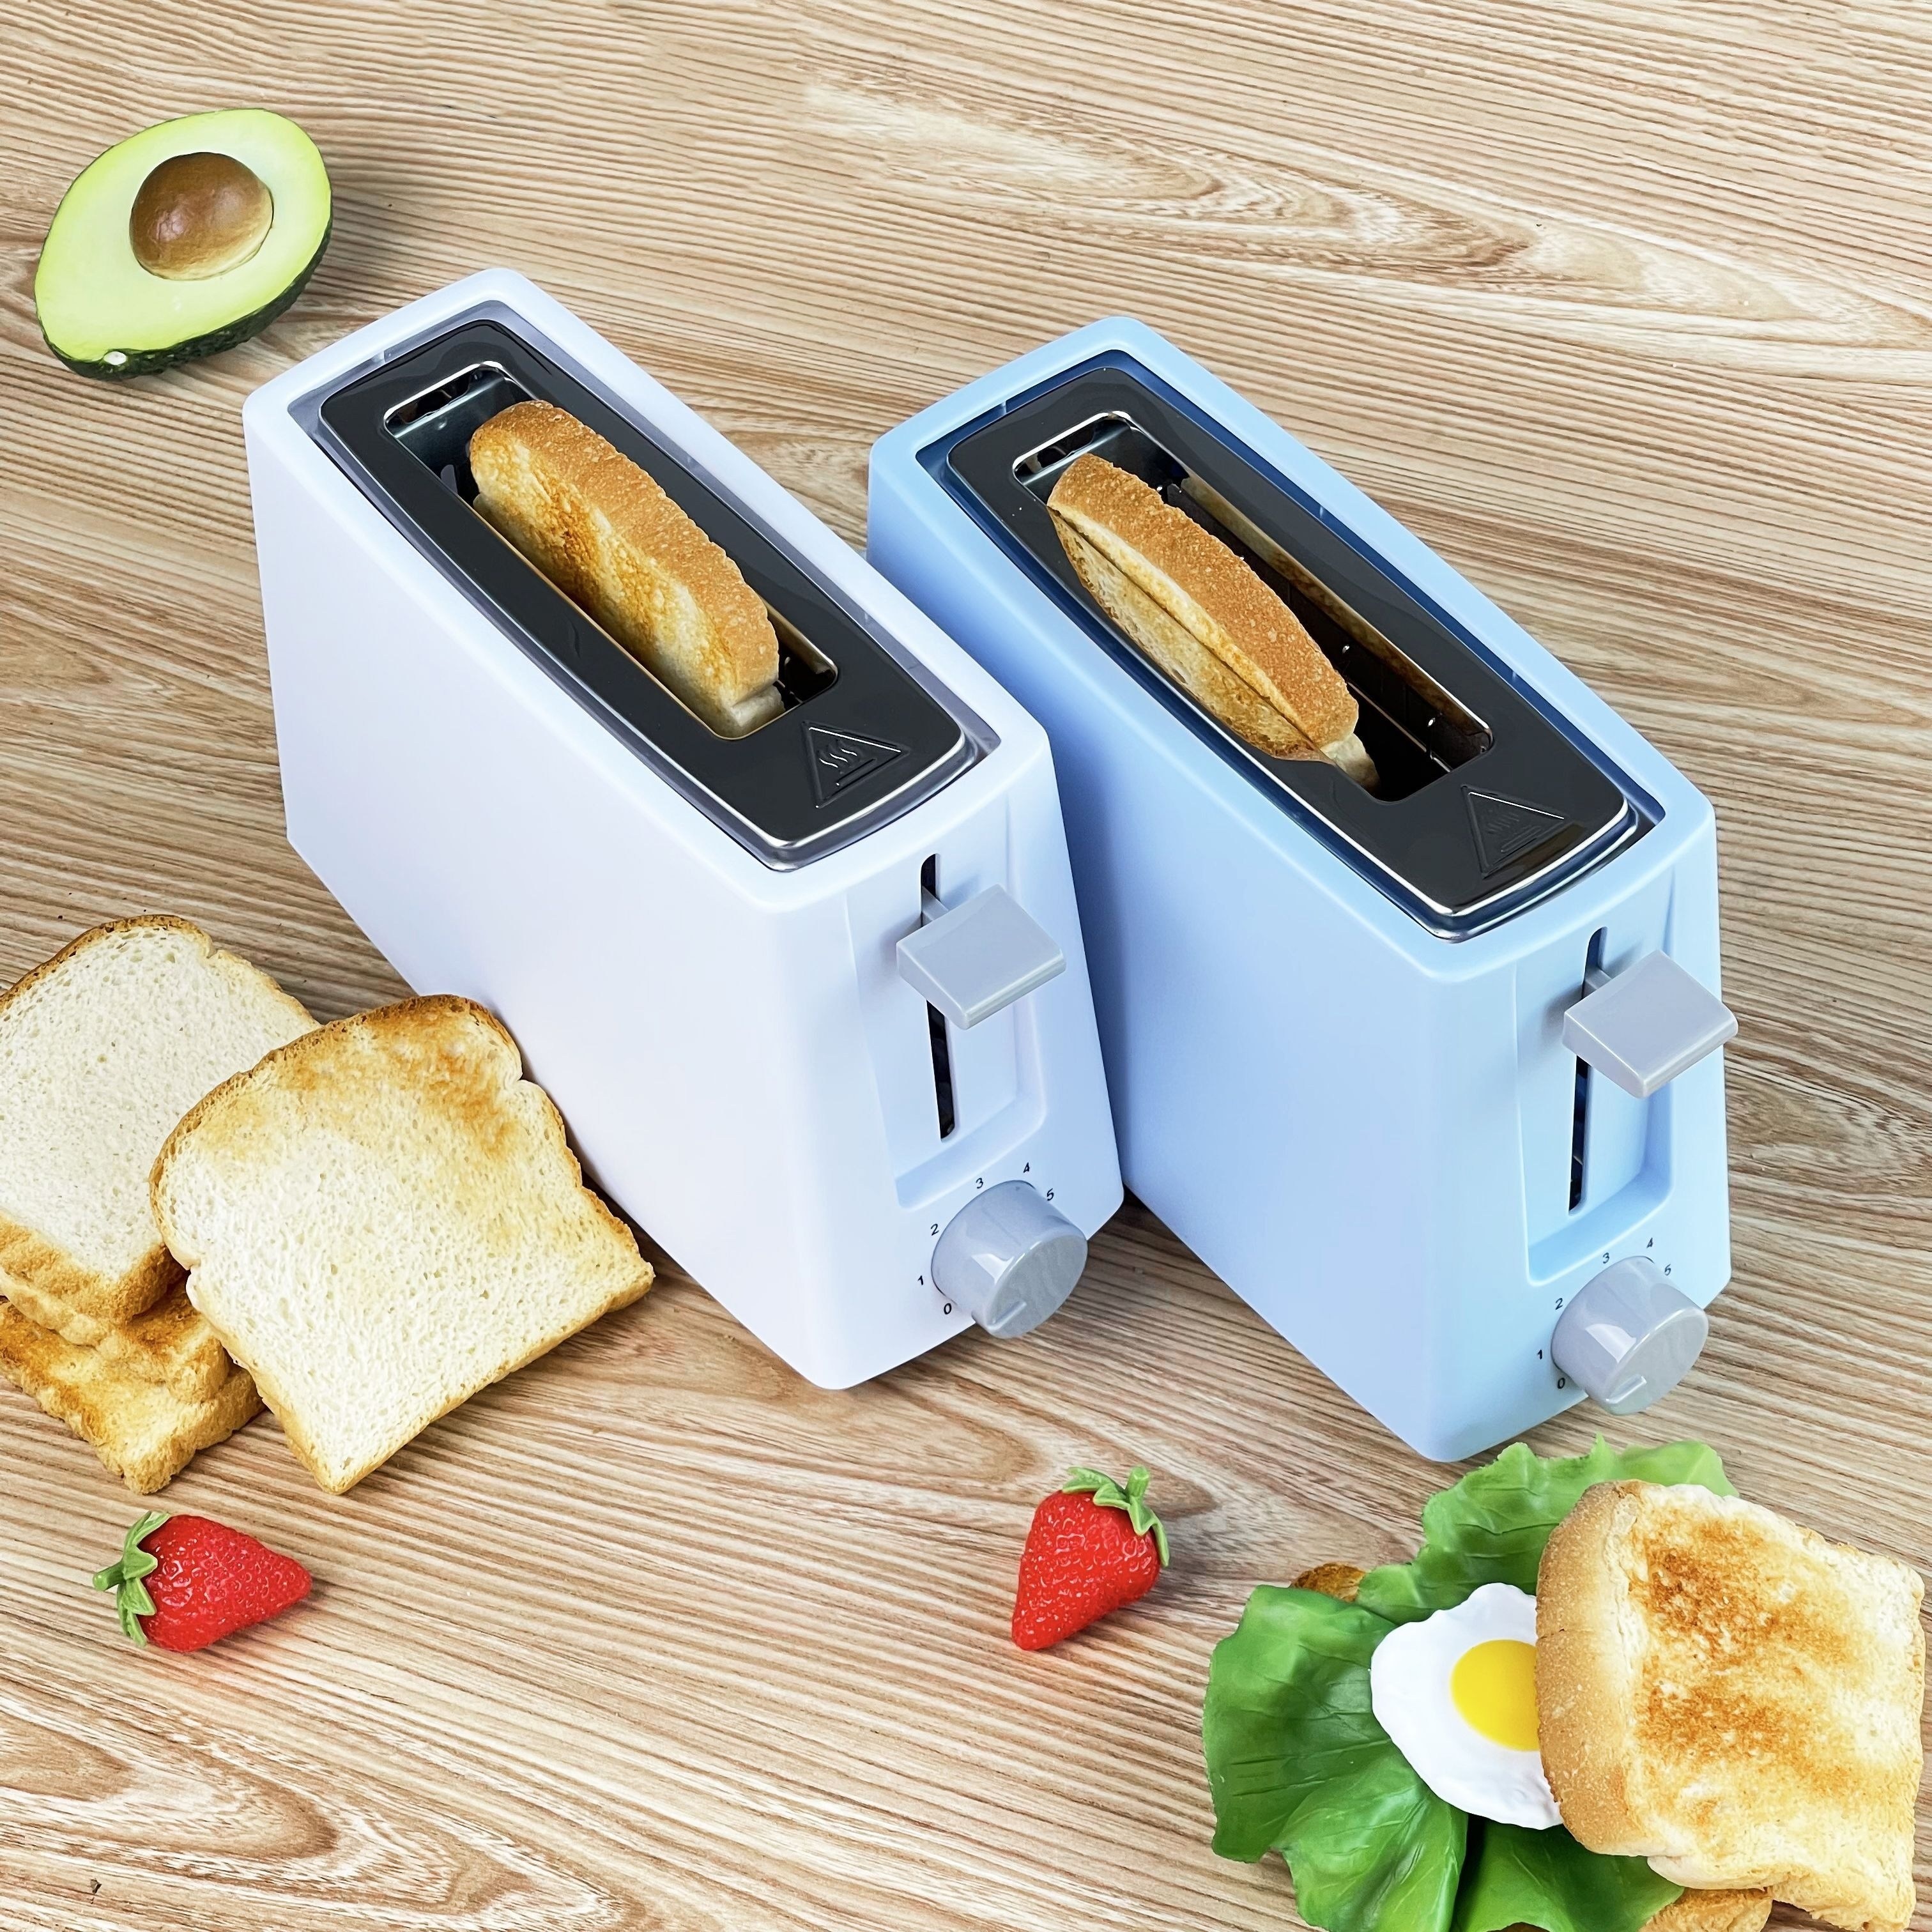 Toaster accessories, Product accessories